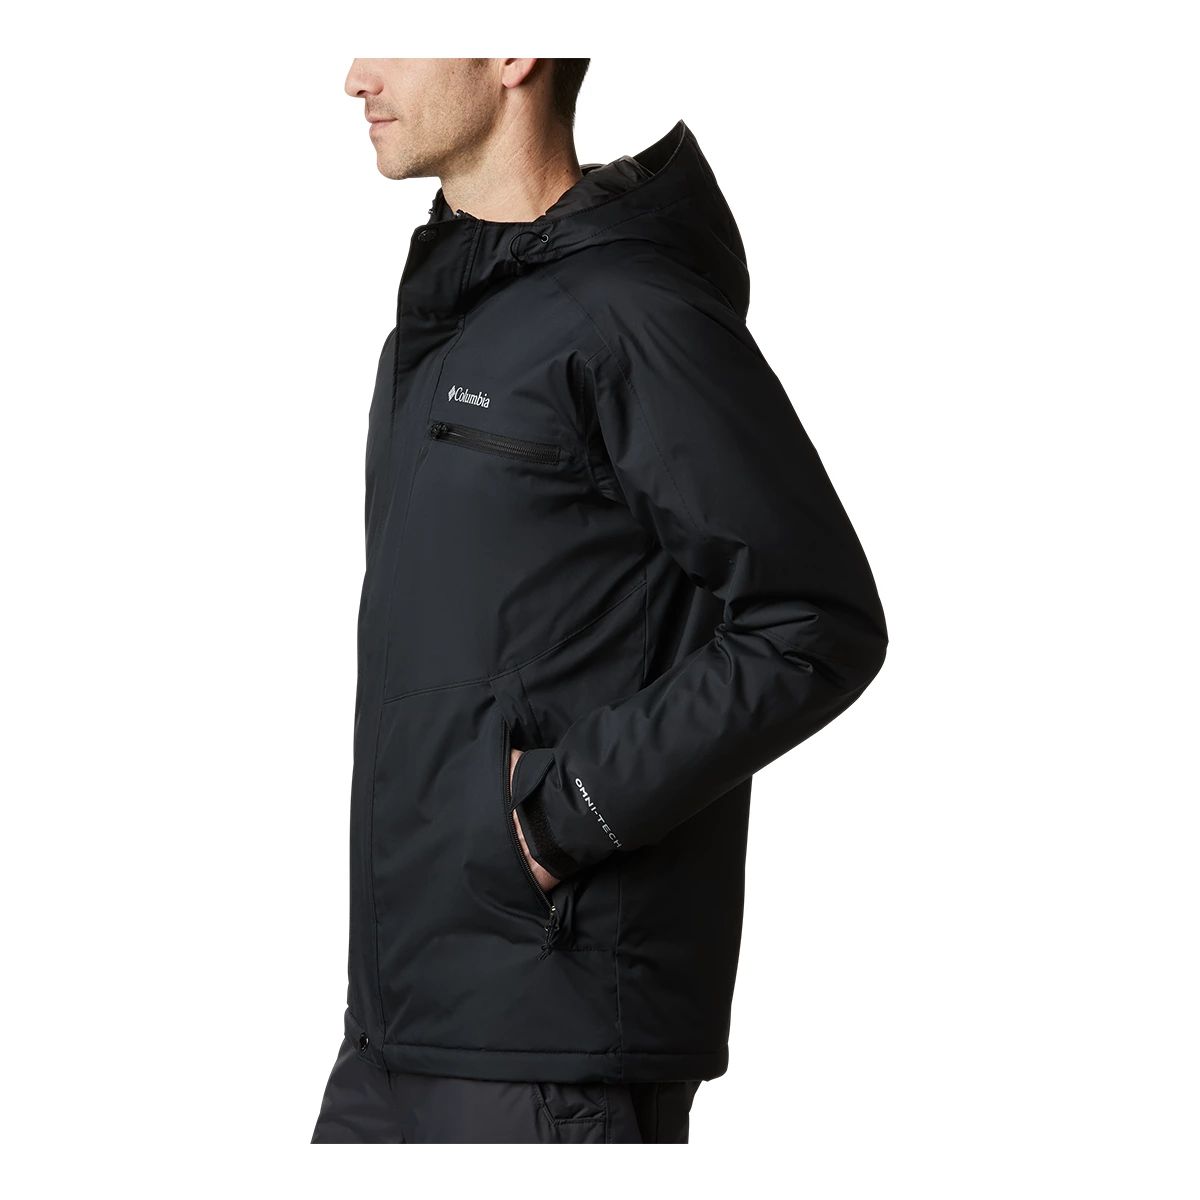 https://media-www.atmosphere.ca/product/div-03-softgoods/dpt-76-outerwear/sdpt-01-mens/333255065/columbia-mens-valley-point-in-black-010-s--b8a24060-fb0e-43de-bb7a-5af0648d622d-jpgrendition.jpg?imdensity=1&imwidth=1244&impolicy=mZoom